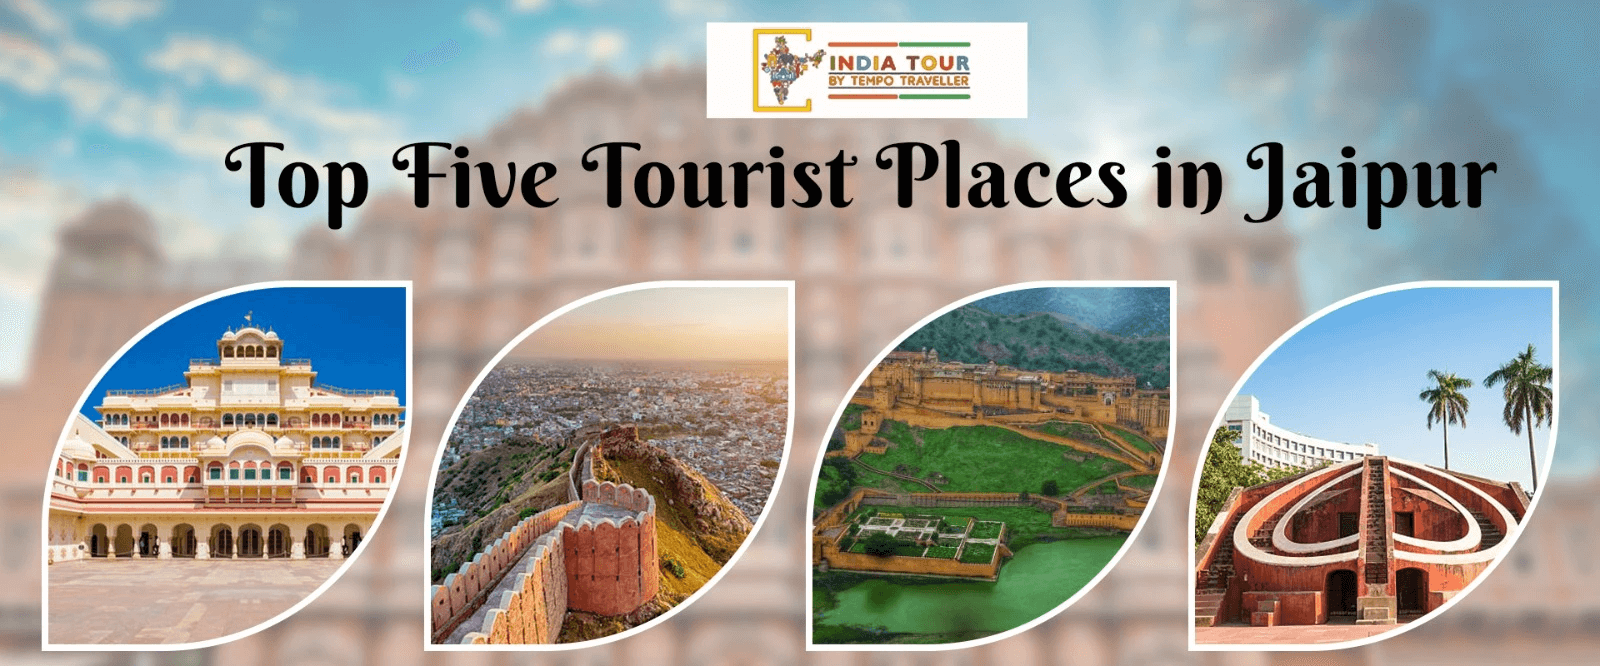 Top Five Tourist Places in Jaipur